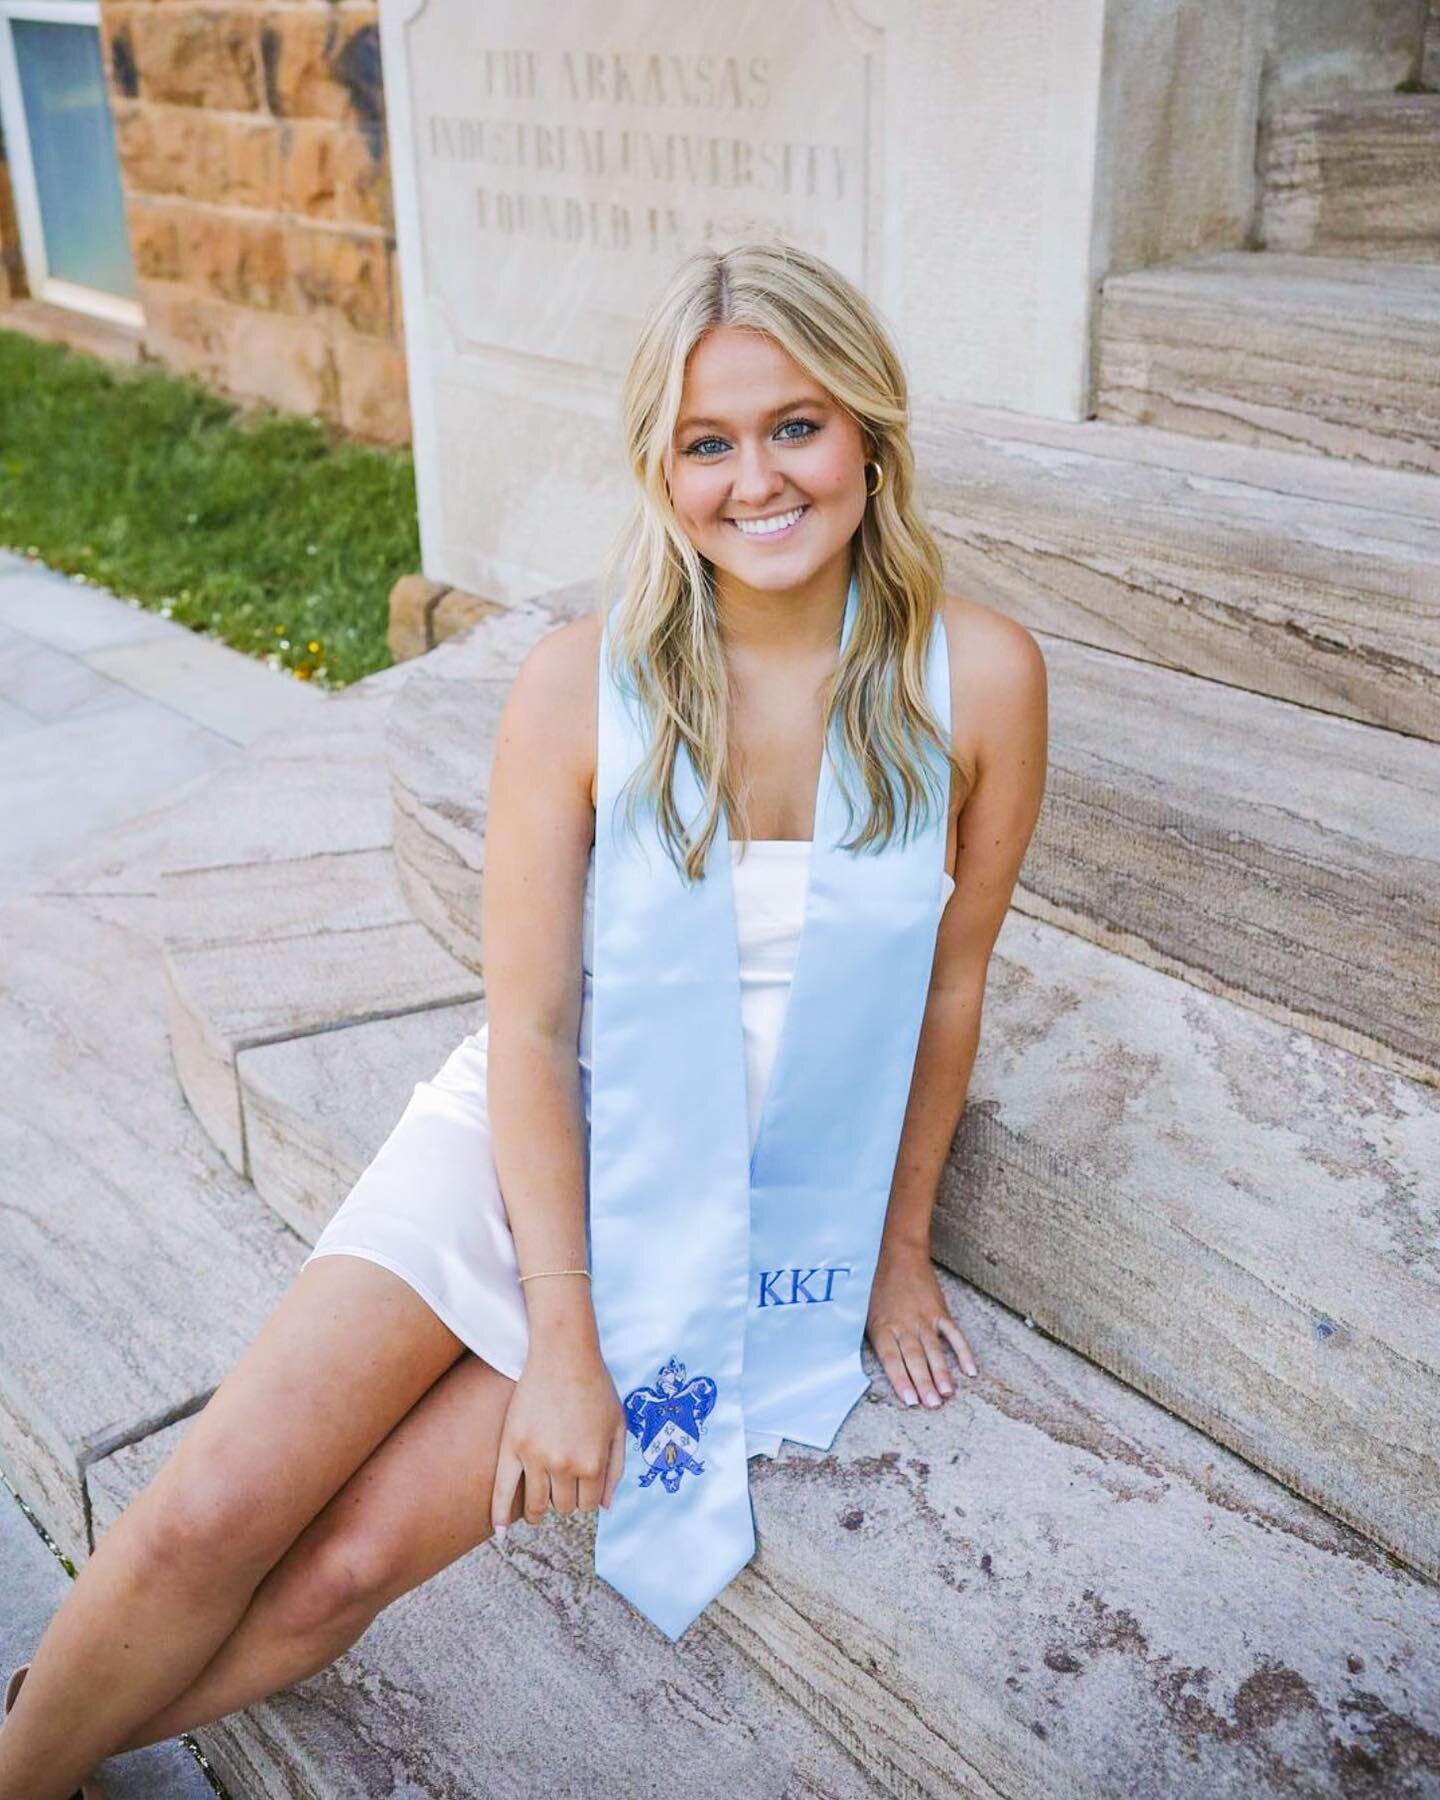 A HUGE congratulations to Emily who has been our intern for over a year!  She&rsquo;s a rockstar who has made a big impact at KKG Inc! 

Emily, We have been so lucky to have you and we know you&rsquo;re going to do amazing things!! Congratulations on